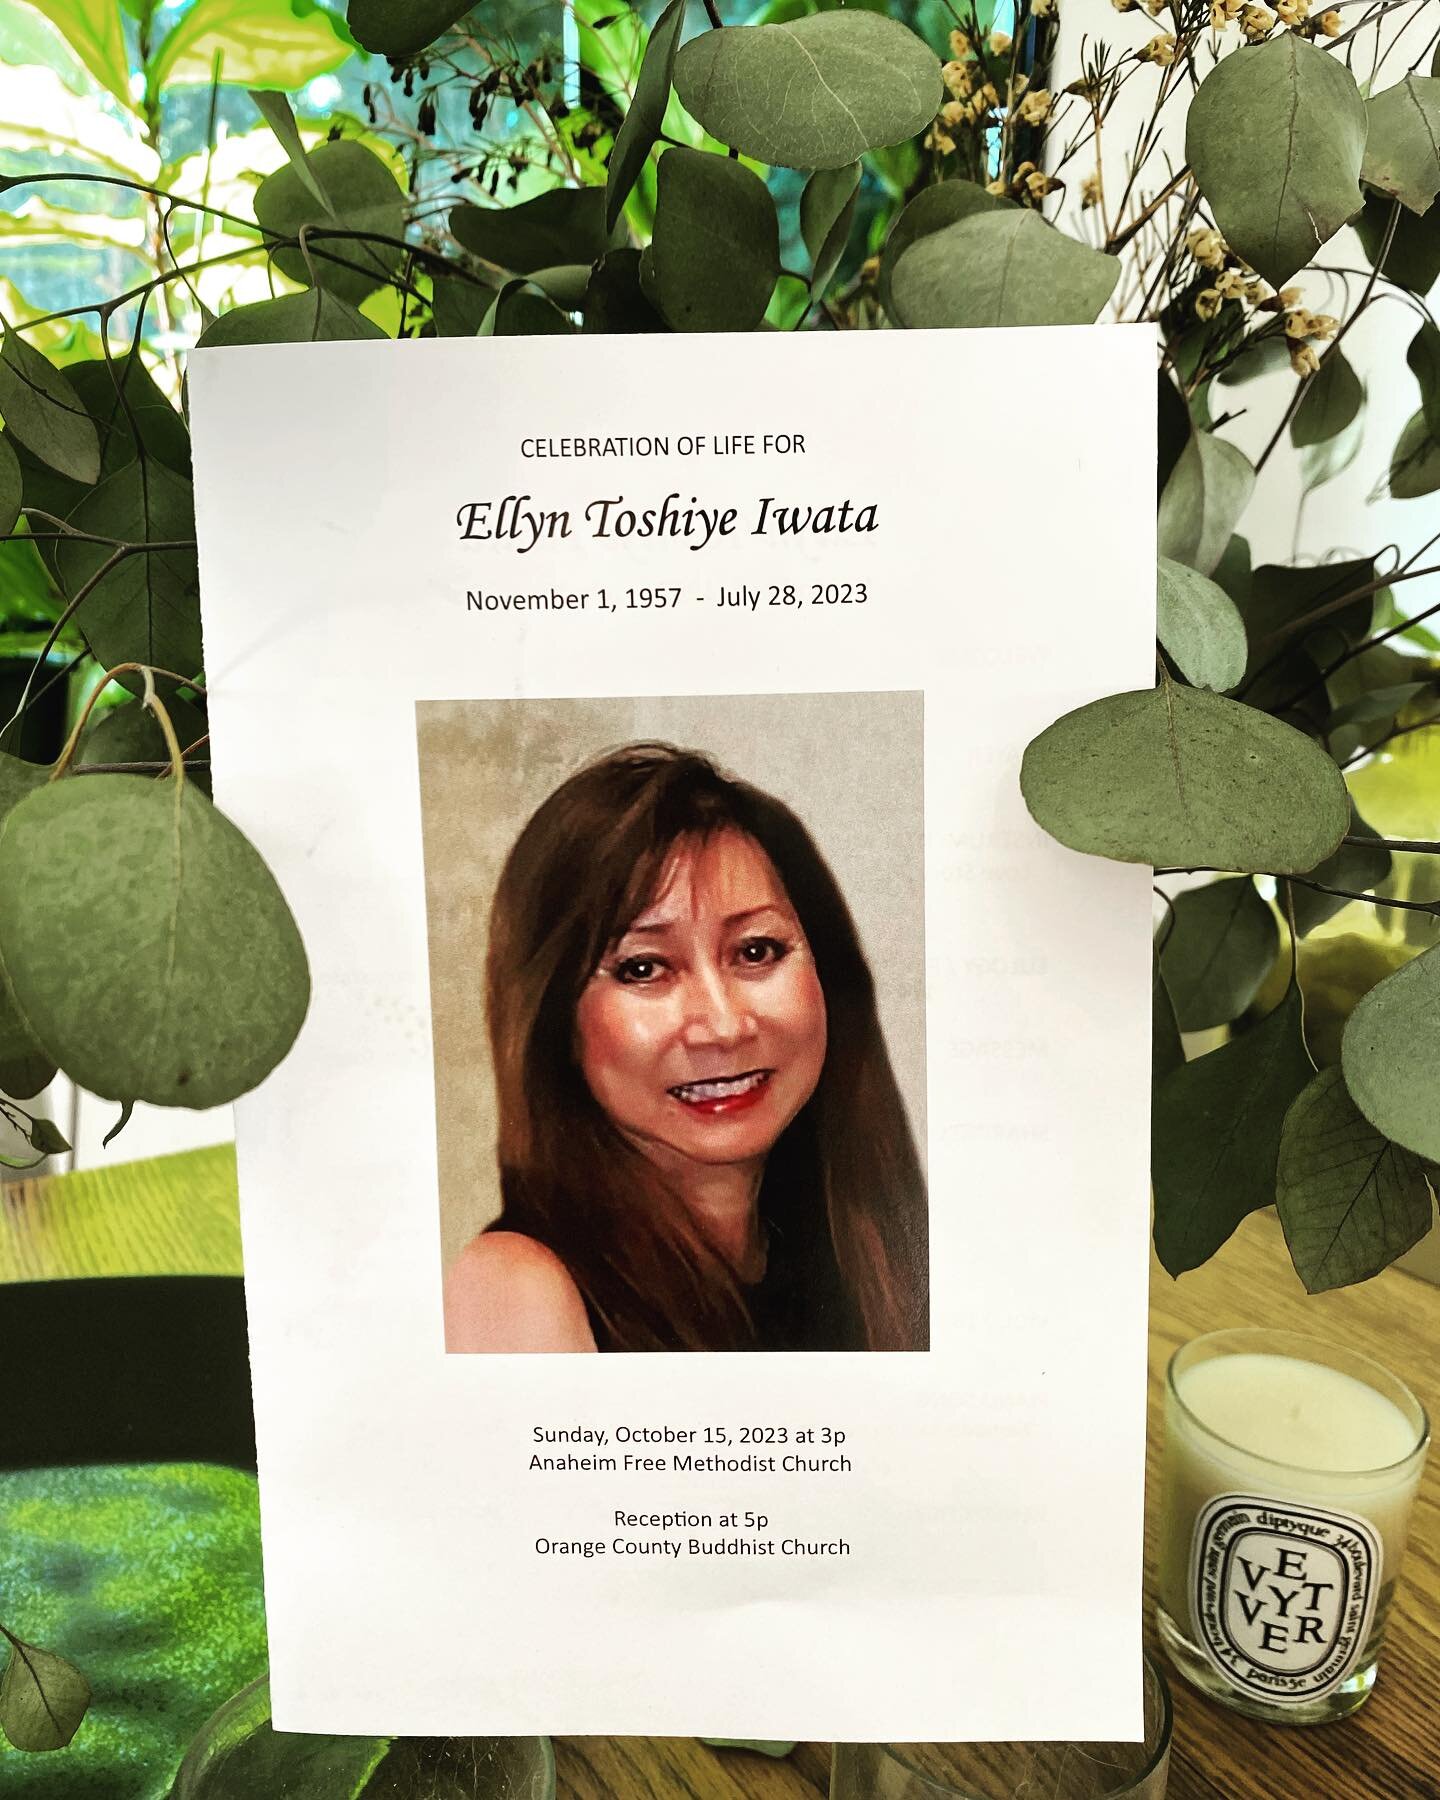 Celebration of Life
Ellyn Toshiye Iwata
Nov 1, 1957- July 28, 2023

My cousin, Ellyn lost her battle with cancer within days of being diagnosed. The news was devastating, lives were forever changed.  Her family and friends met yesterday to celebrate 